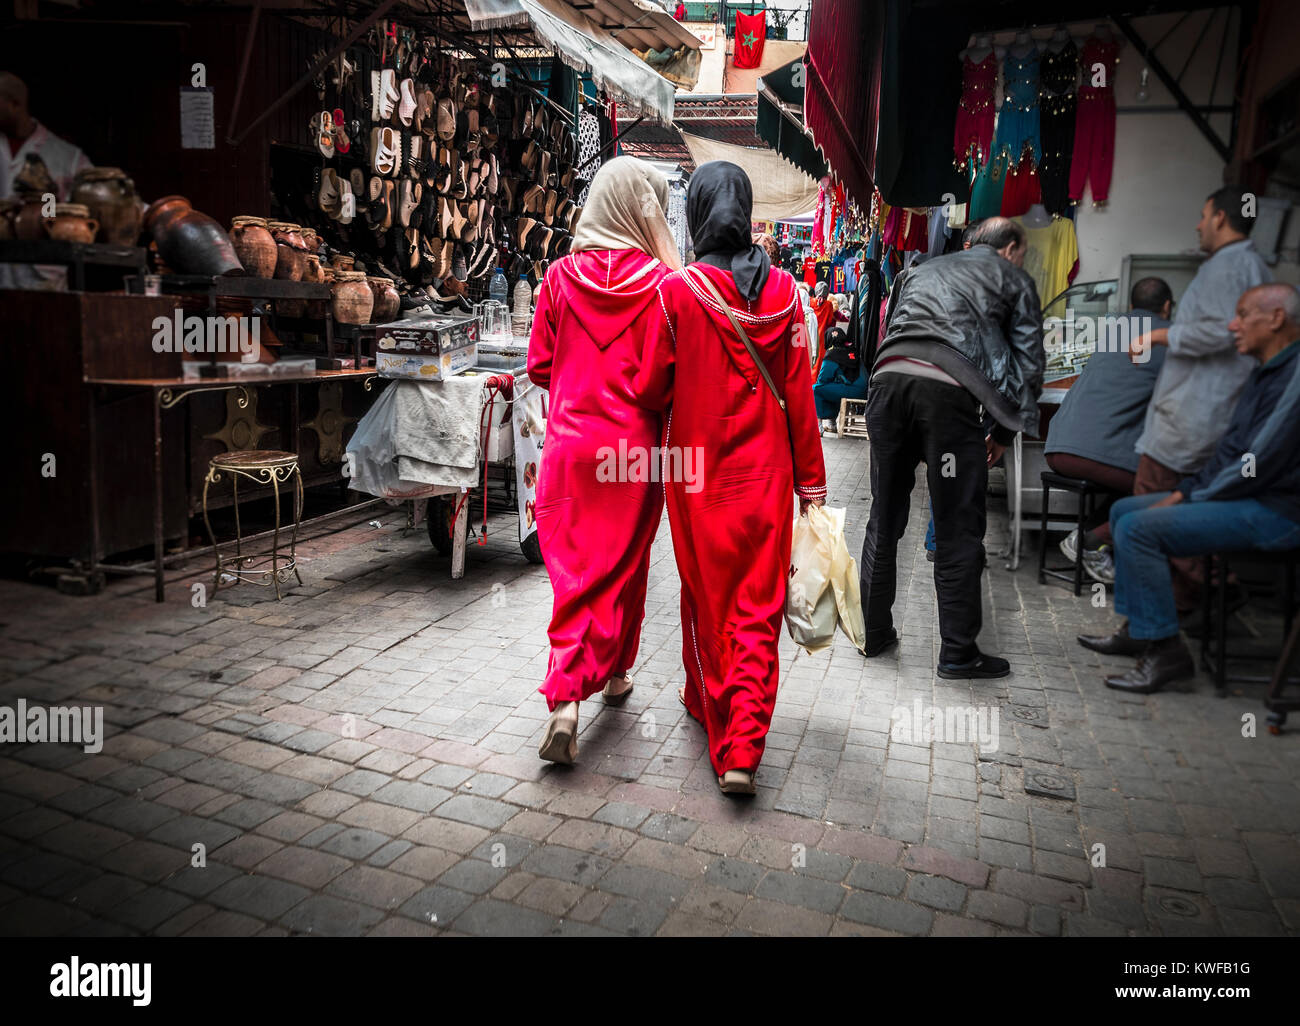 Two red clad local girls in Djellabas shopping in the souk. Stock Photo